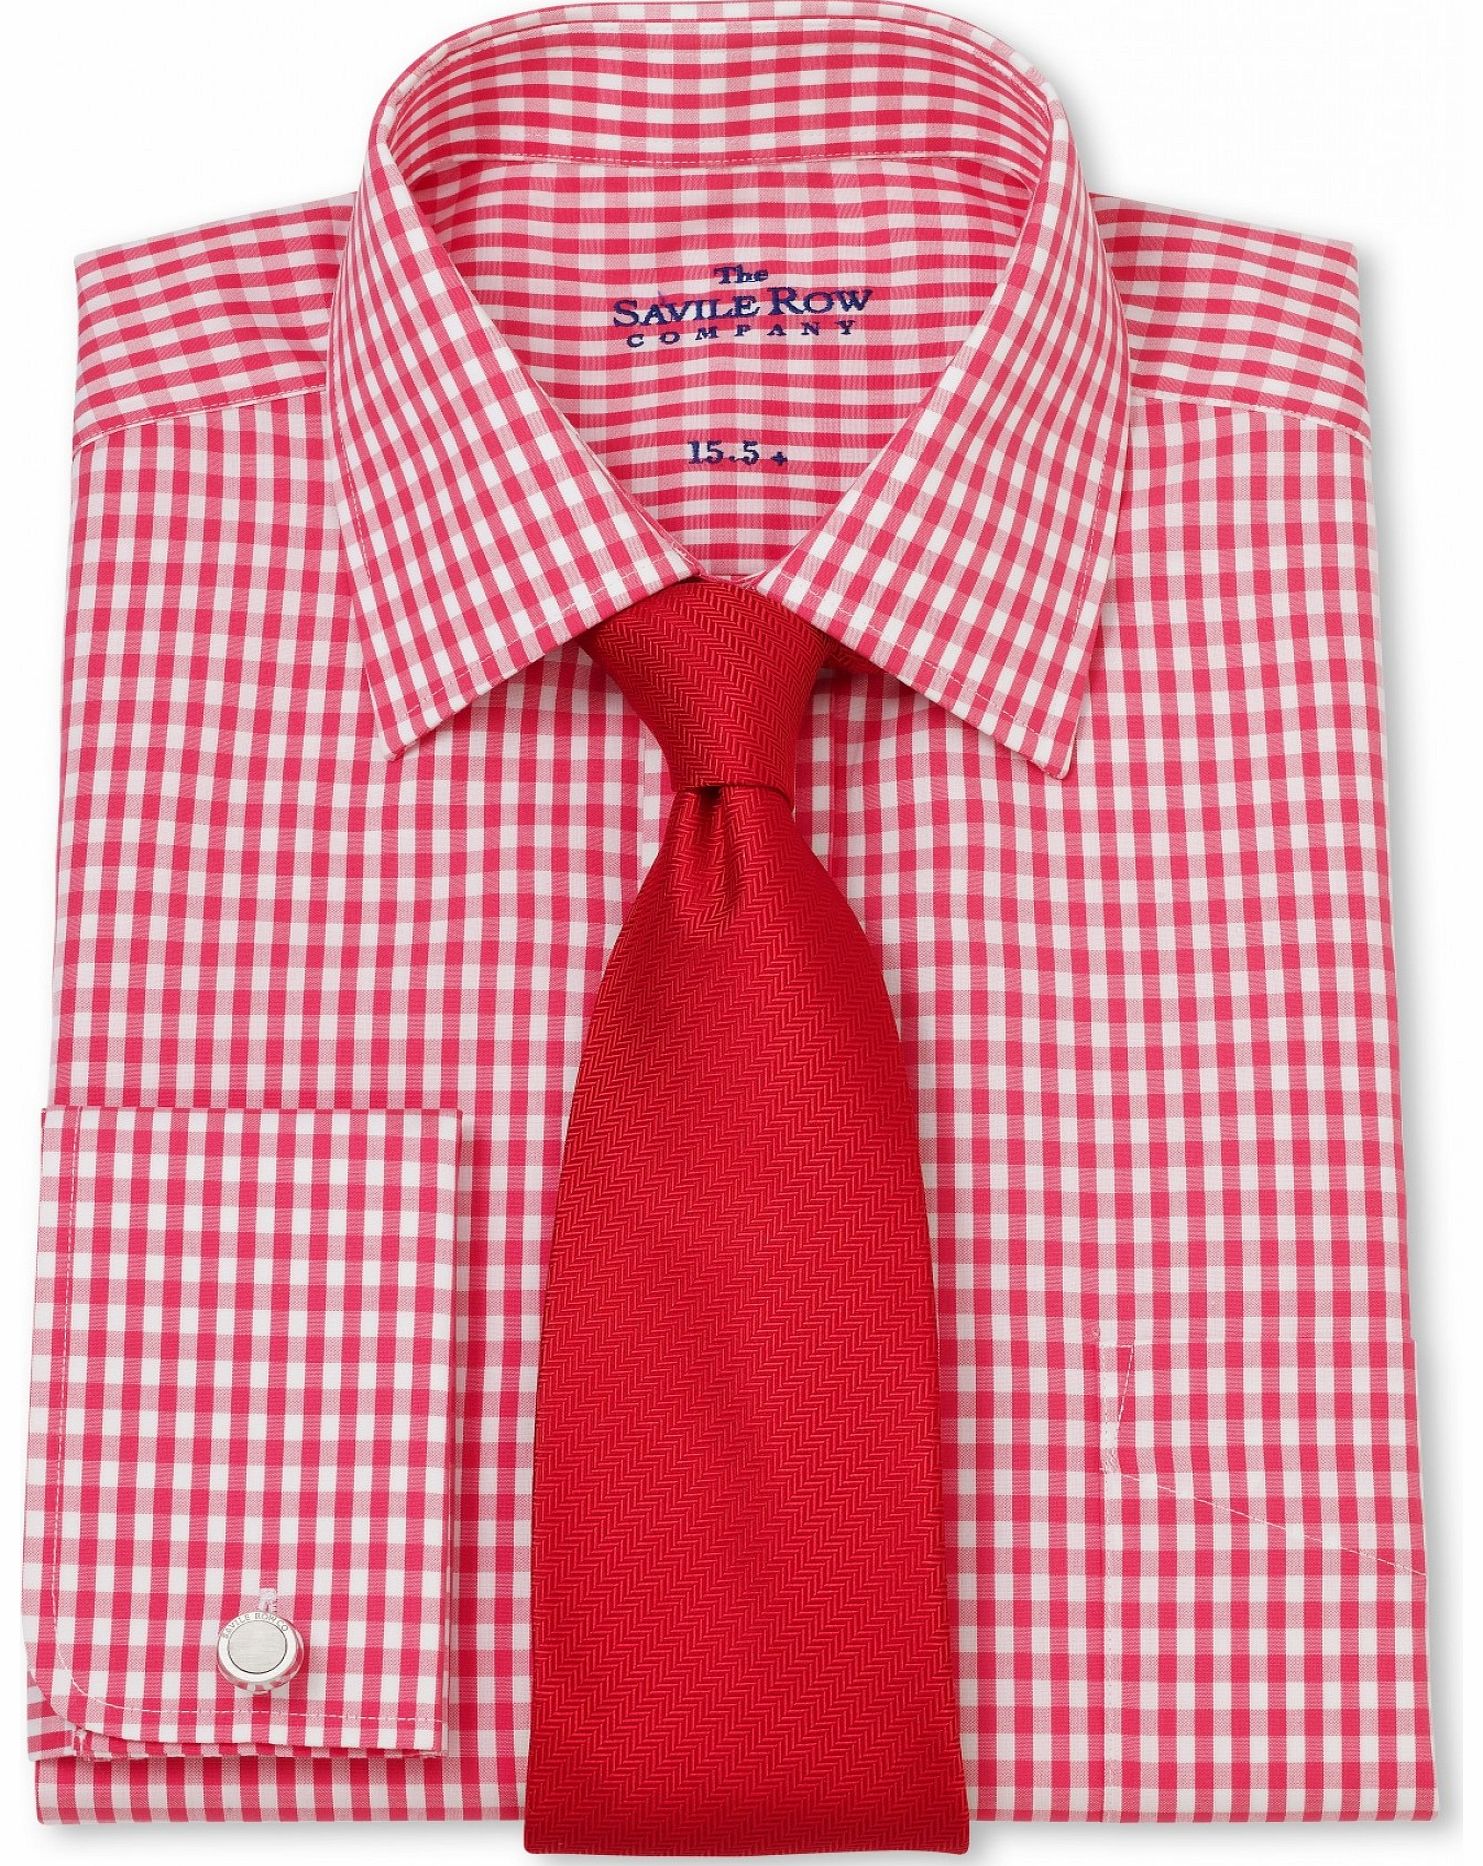 Savile Row Company Pink White Gingham Check Classic Fit Shirt 19